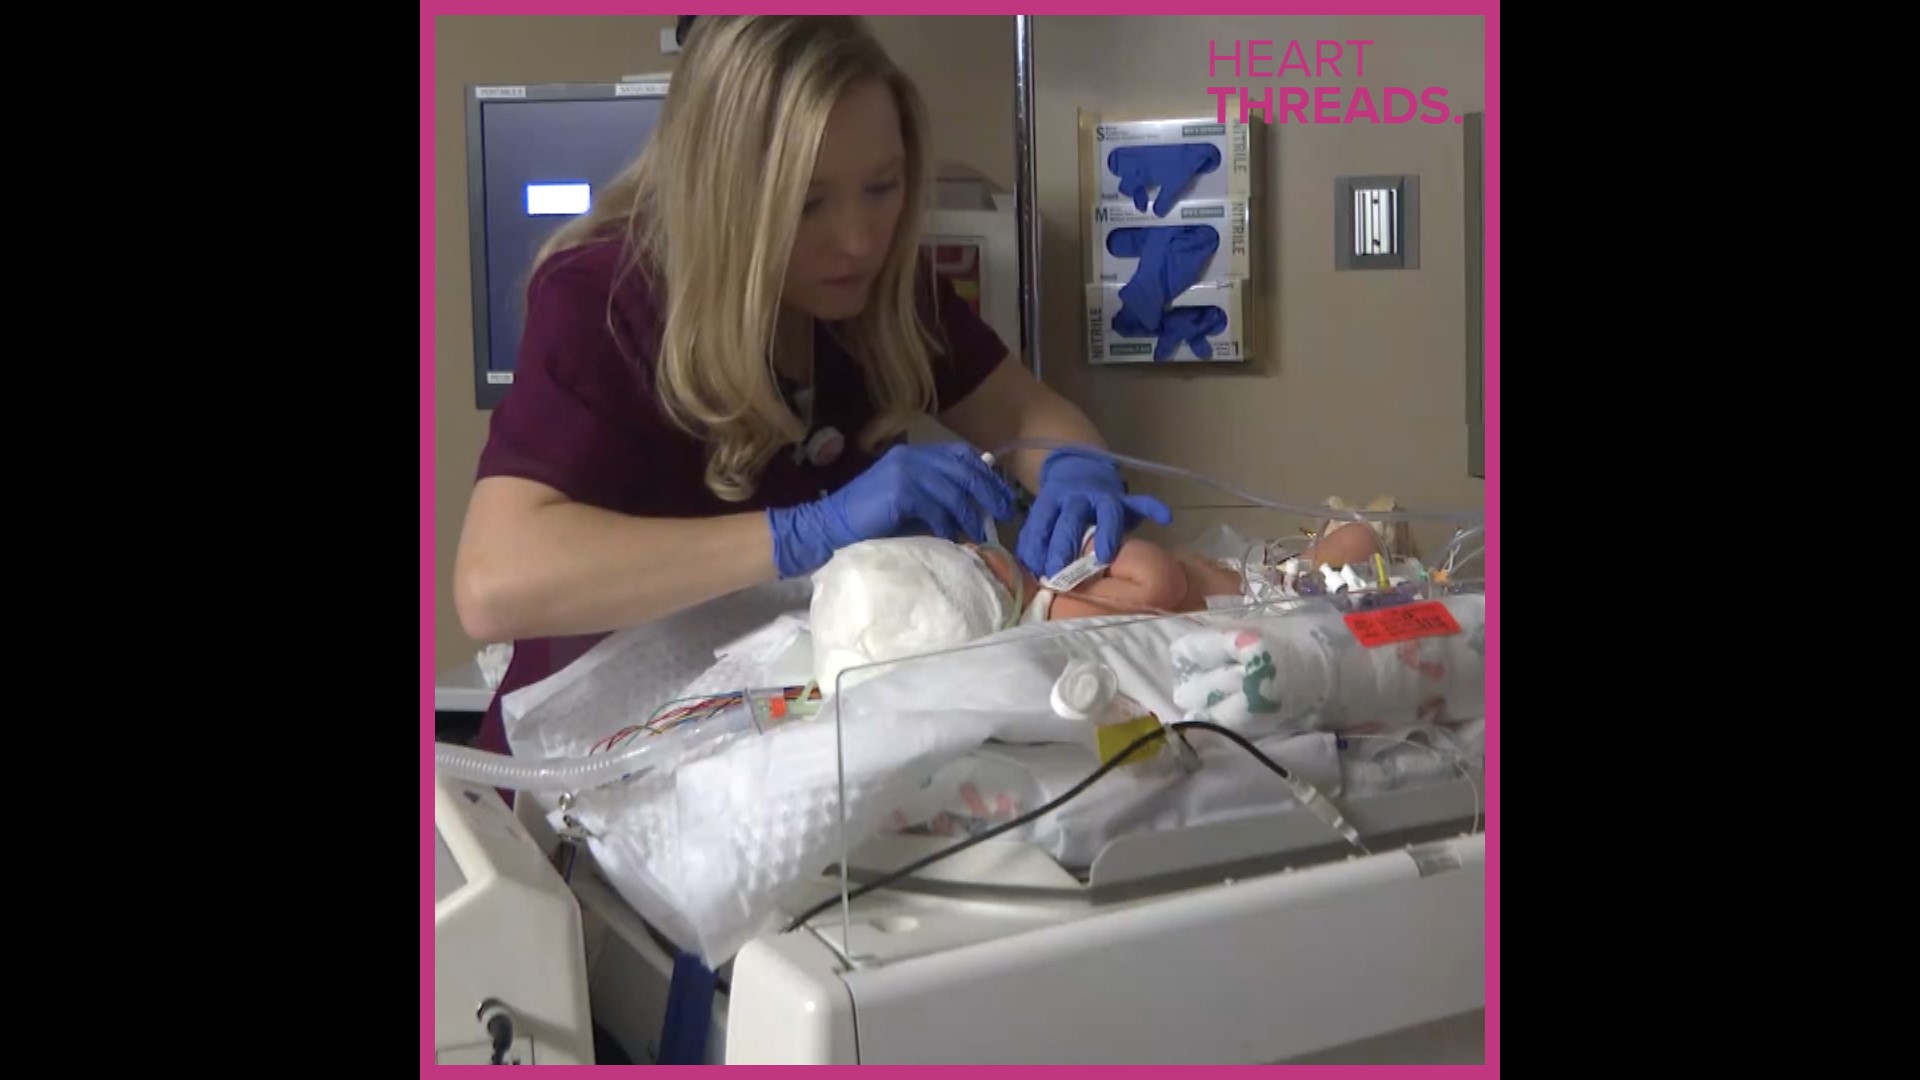 Tammy was born 3 months early and weighed just 1 pound, 4 ounces. Now grown, she works as a nurse in the same NICU that saved her life.